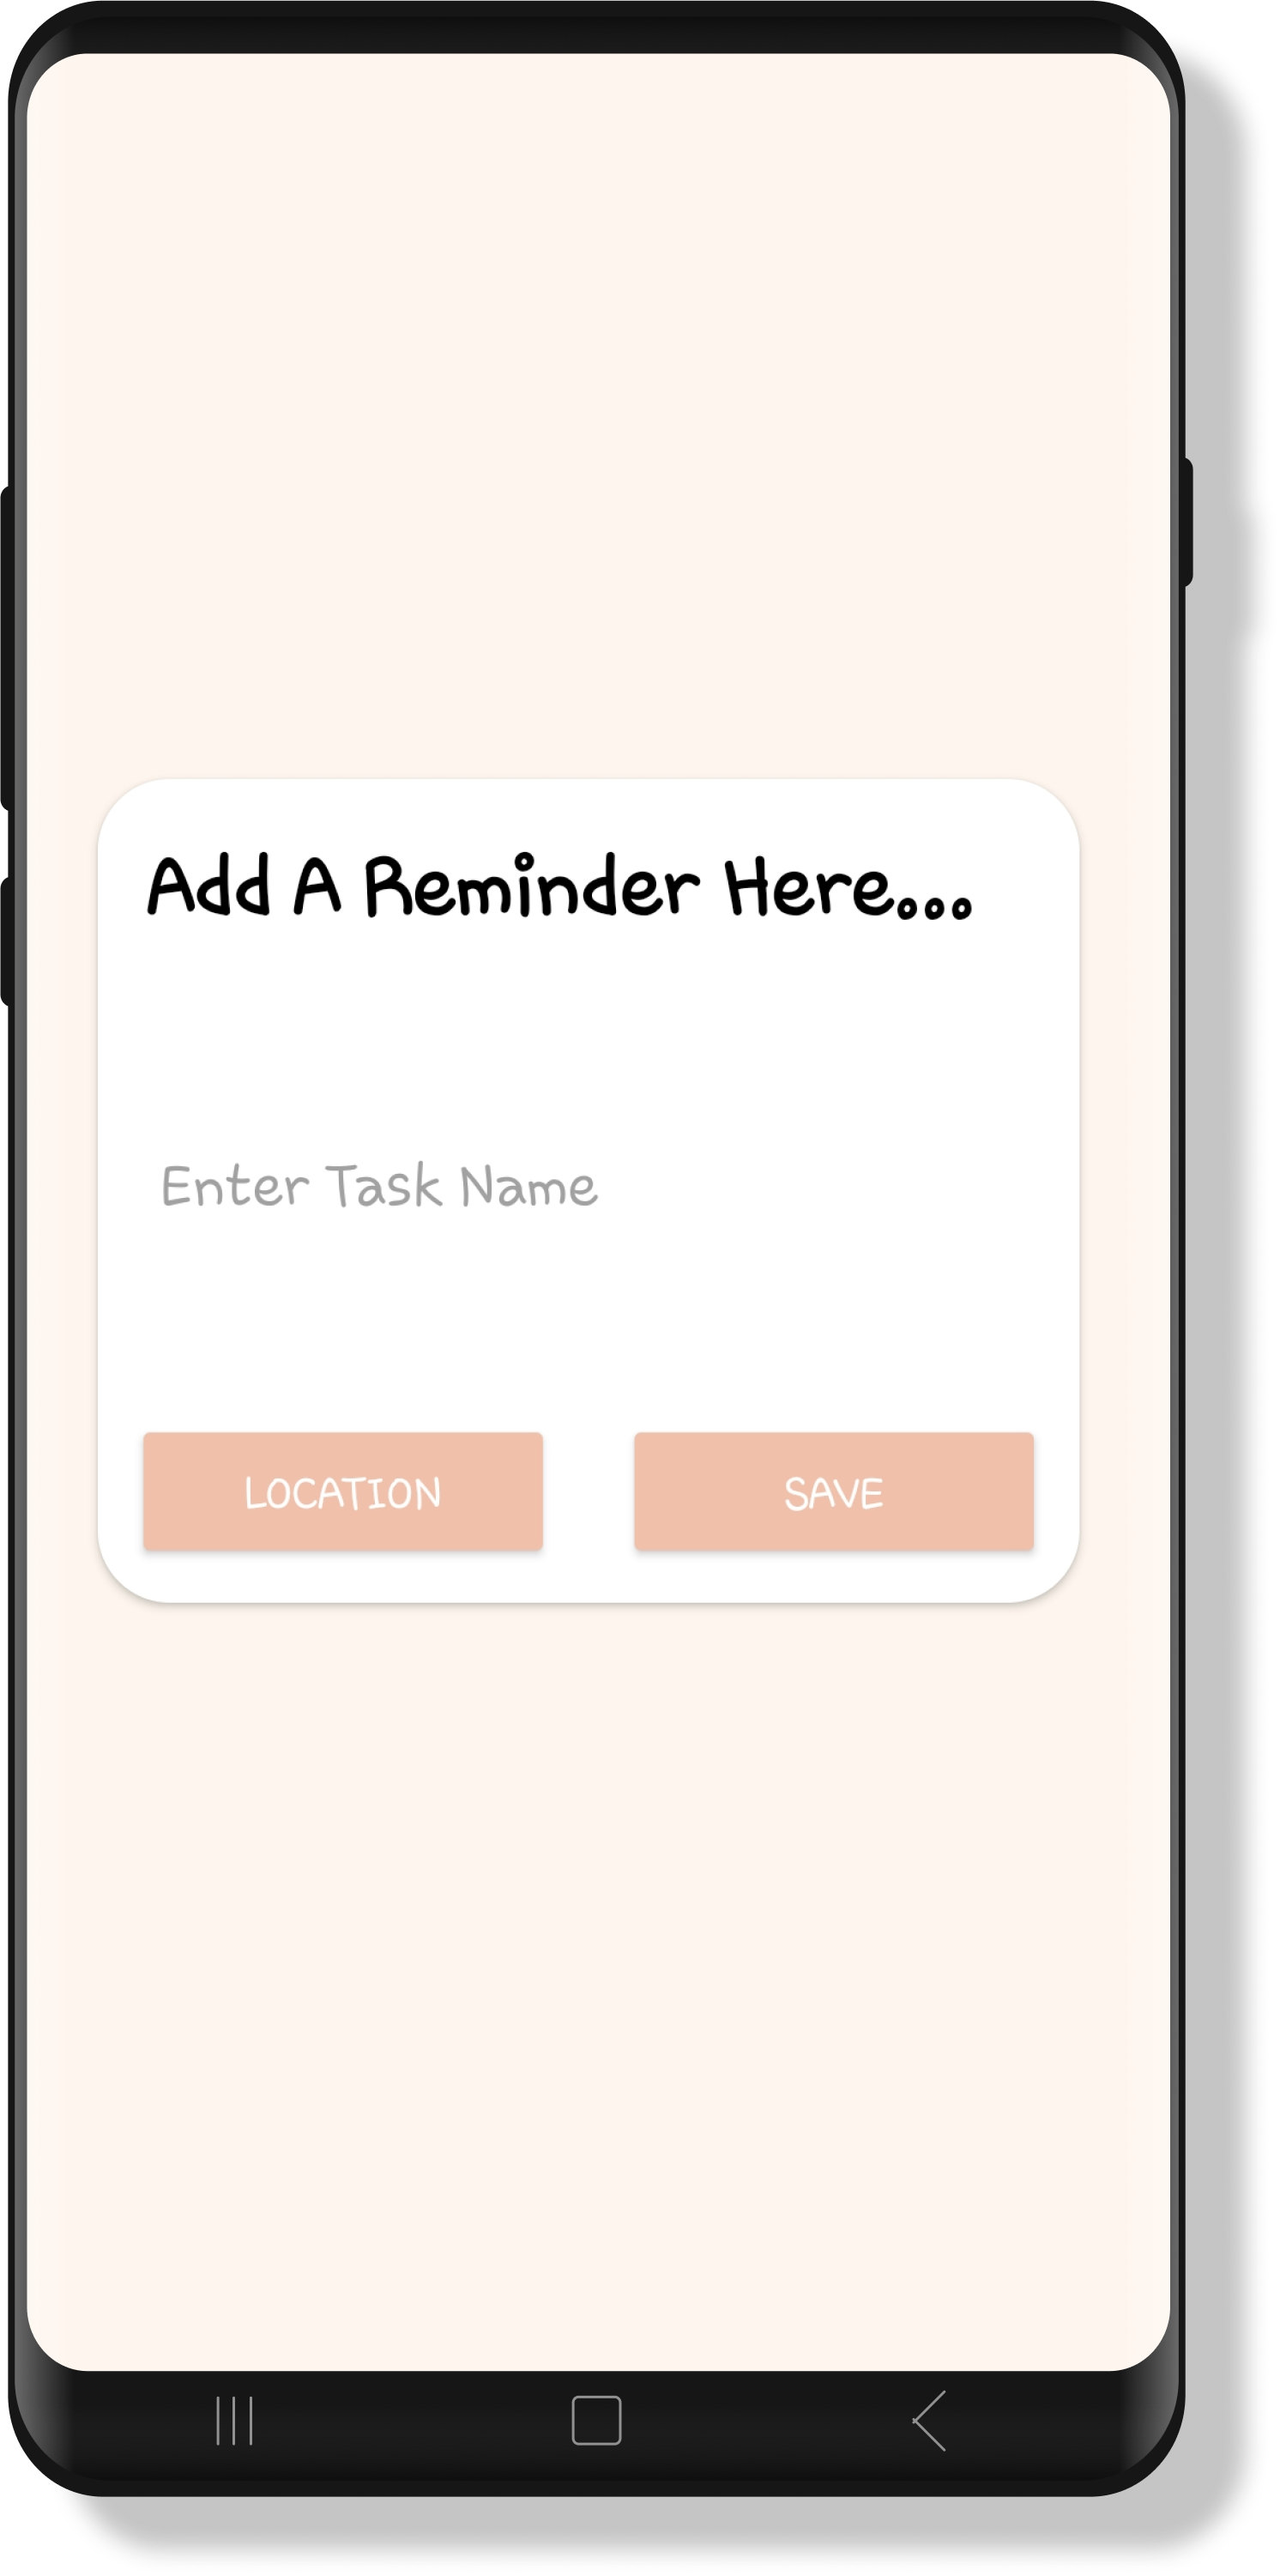 image of screen for process of adding reminders in the app